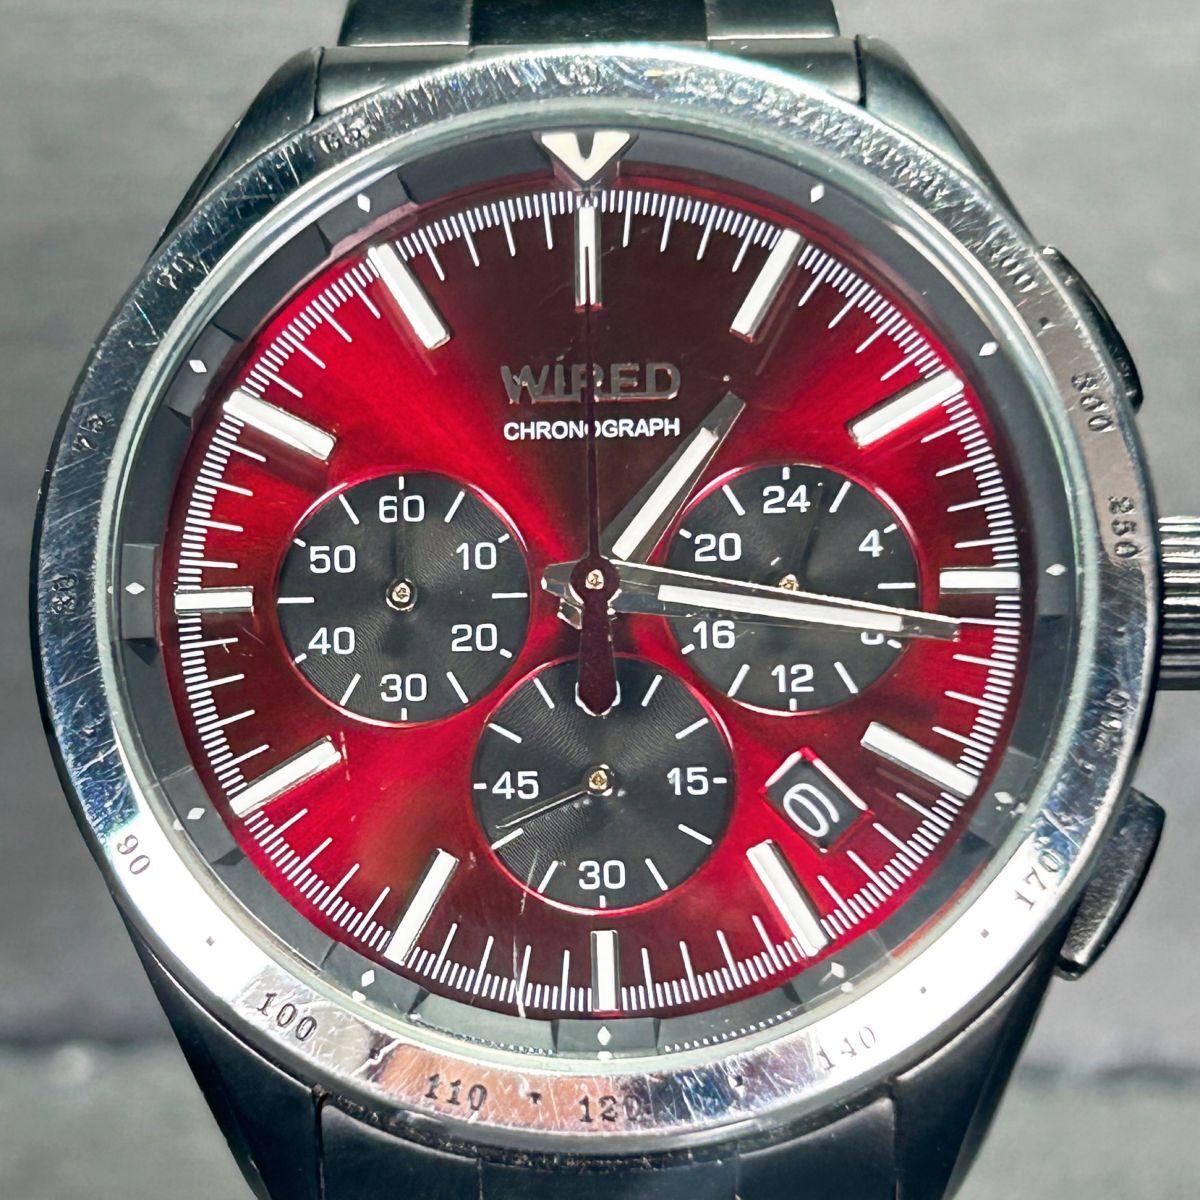 SEIKO Seiko WIRED Wired VK63-K006 wristwatch quarts analogue chronograph calendar wine red men's new goods battery replaced 